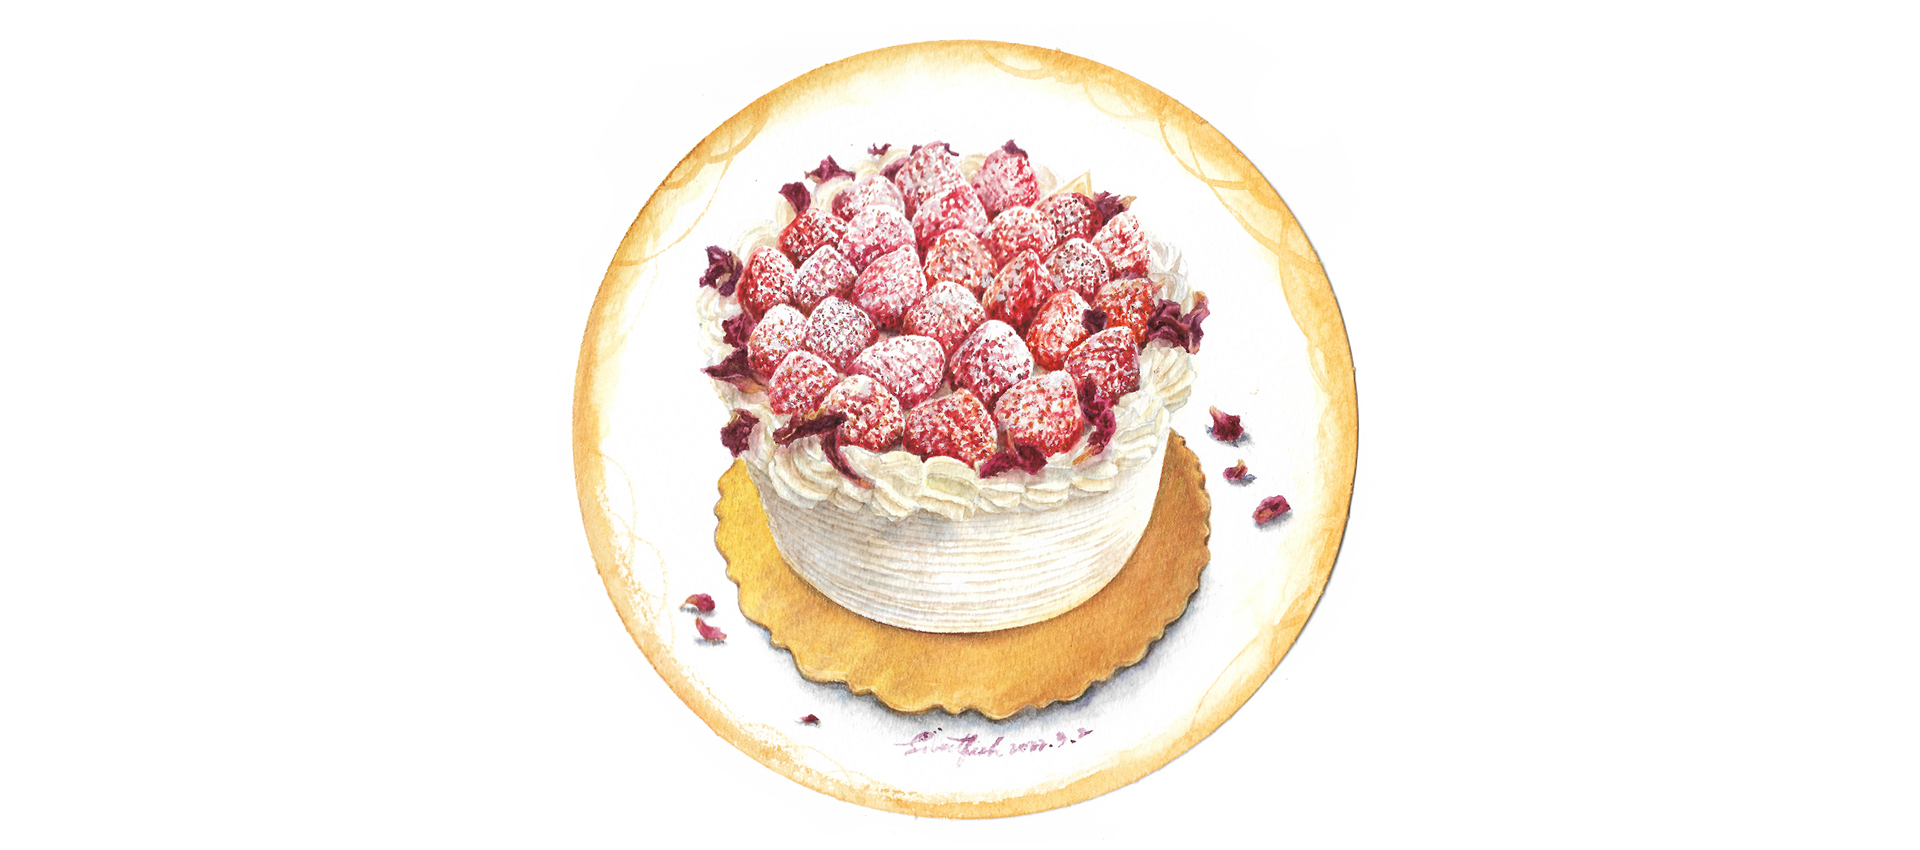 strawberry-cake-watercolor-food-illustration-by-sweetfish-food-art